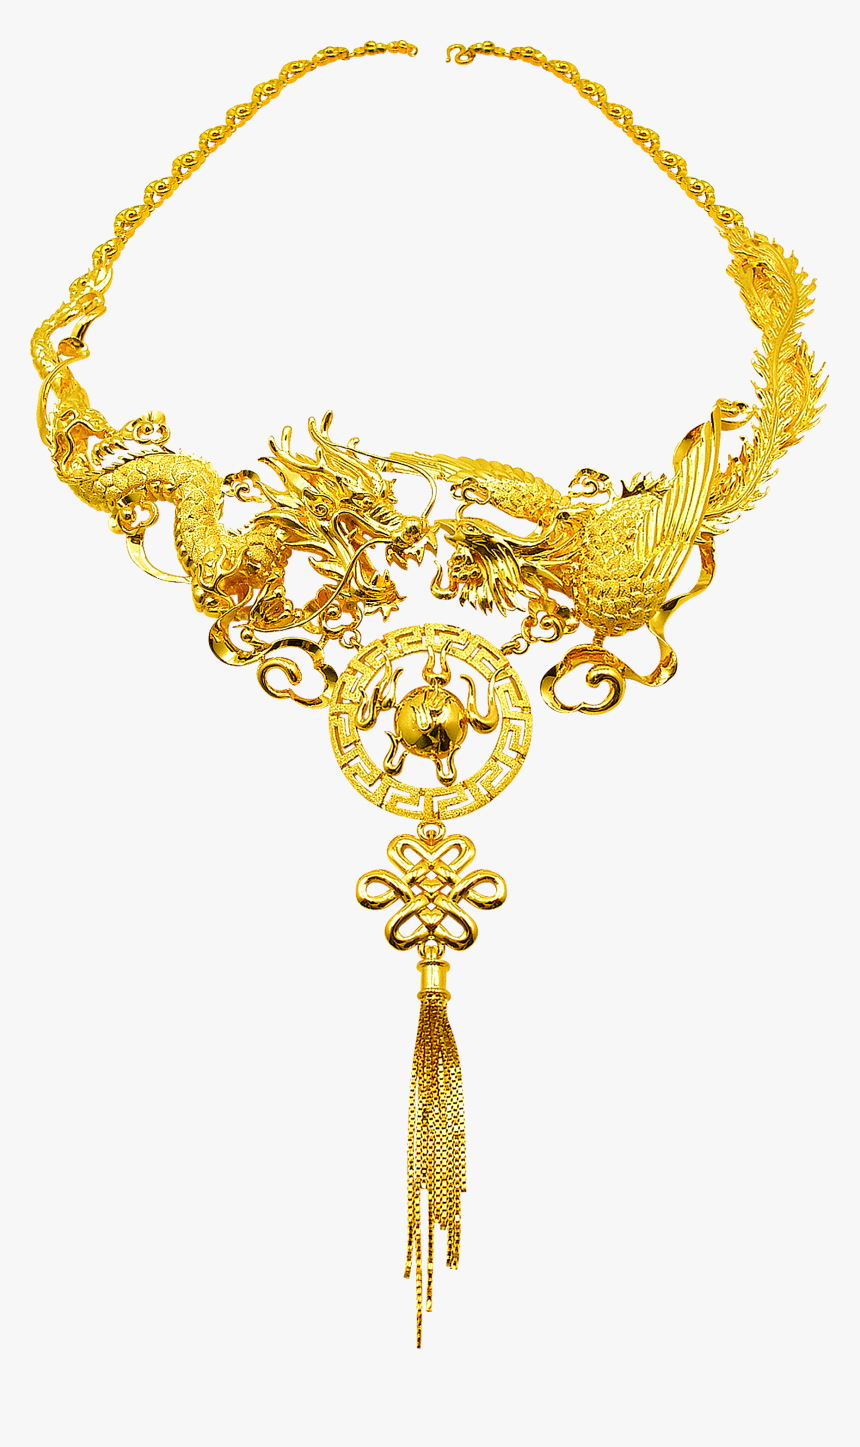 Chinese Jewelry Gold, HD Png Download, Free Download